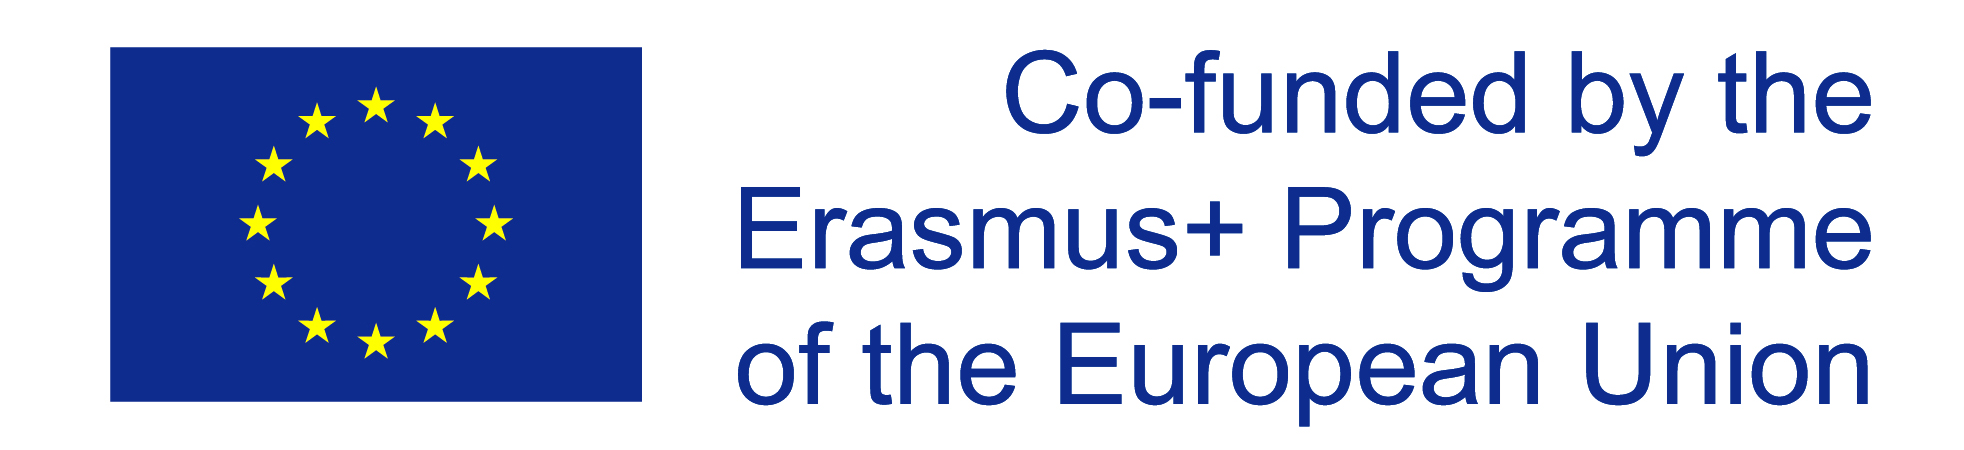 This website was developed in the framework of the 'Developing Opportunities for Volunteers to become social Entrepreneurs' (DOVE) project which is co-funded by the European Commission Erasmus+ Programme. The website reflects the views only of its authors and the European Commission cannot be held responsible for any use which may be made of the information contained therein.